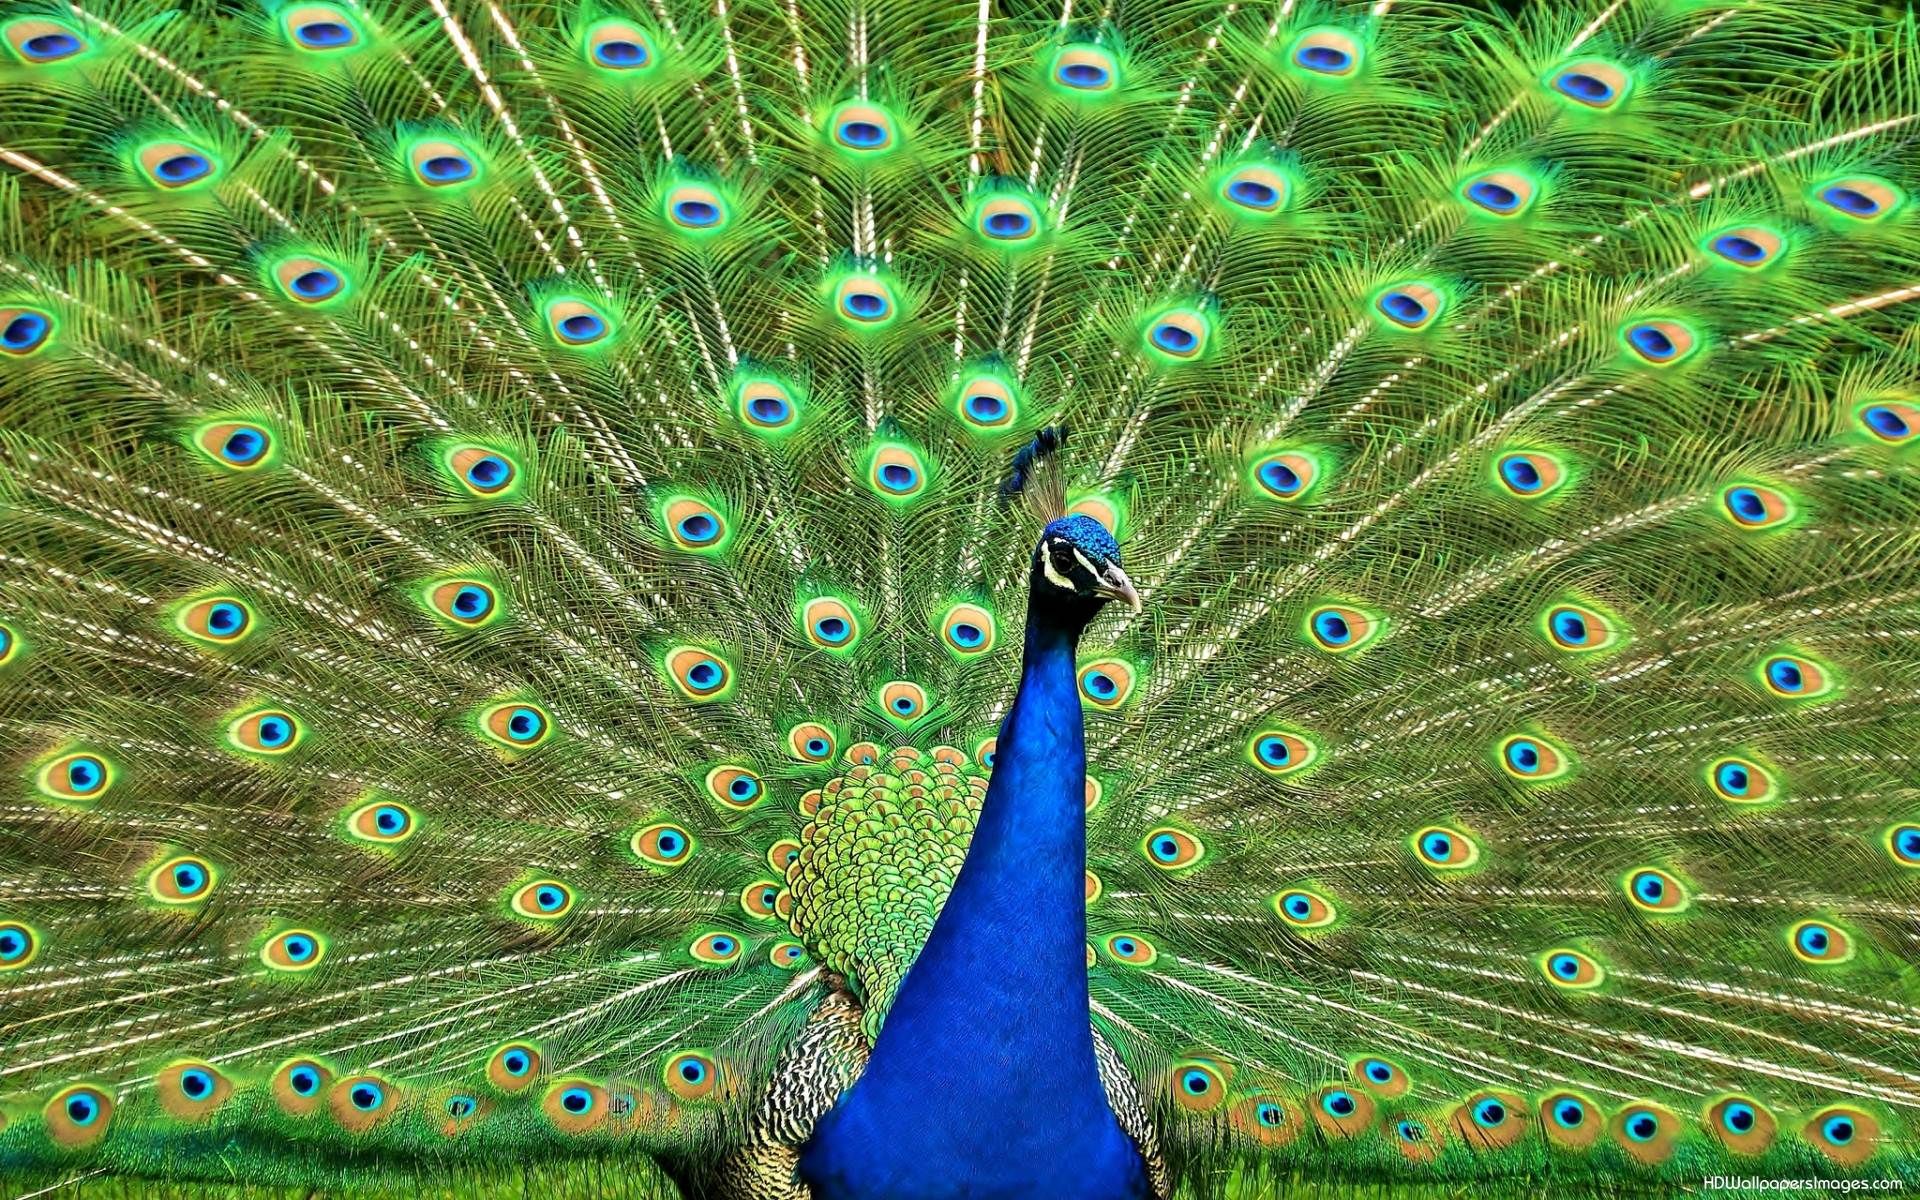 Wallpapers Of Peacock Feathers Hd 2015 - Full Size Peacock Full - HD Wallpaper 